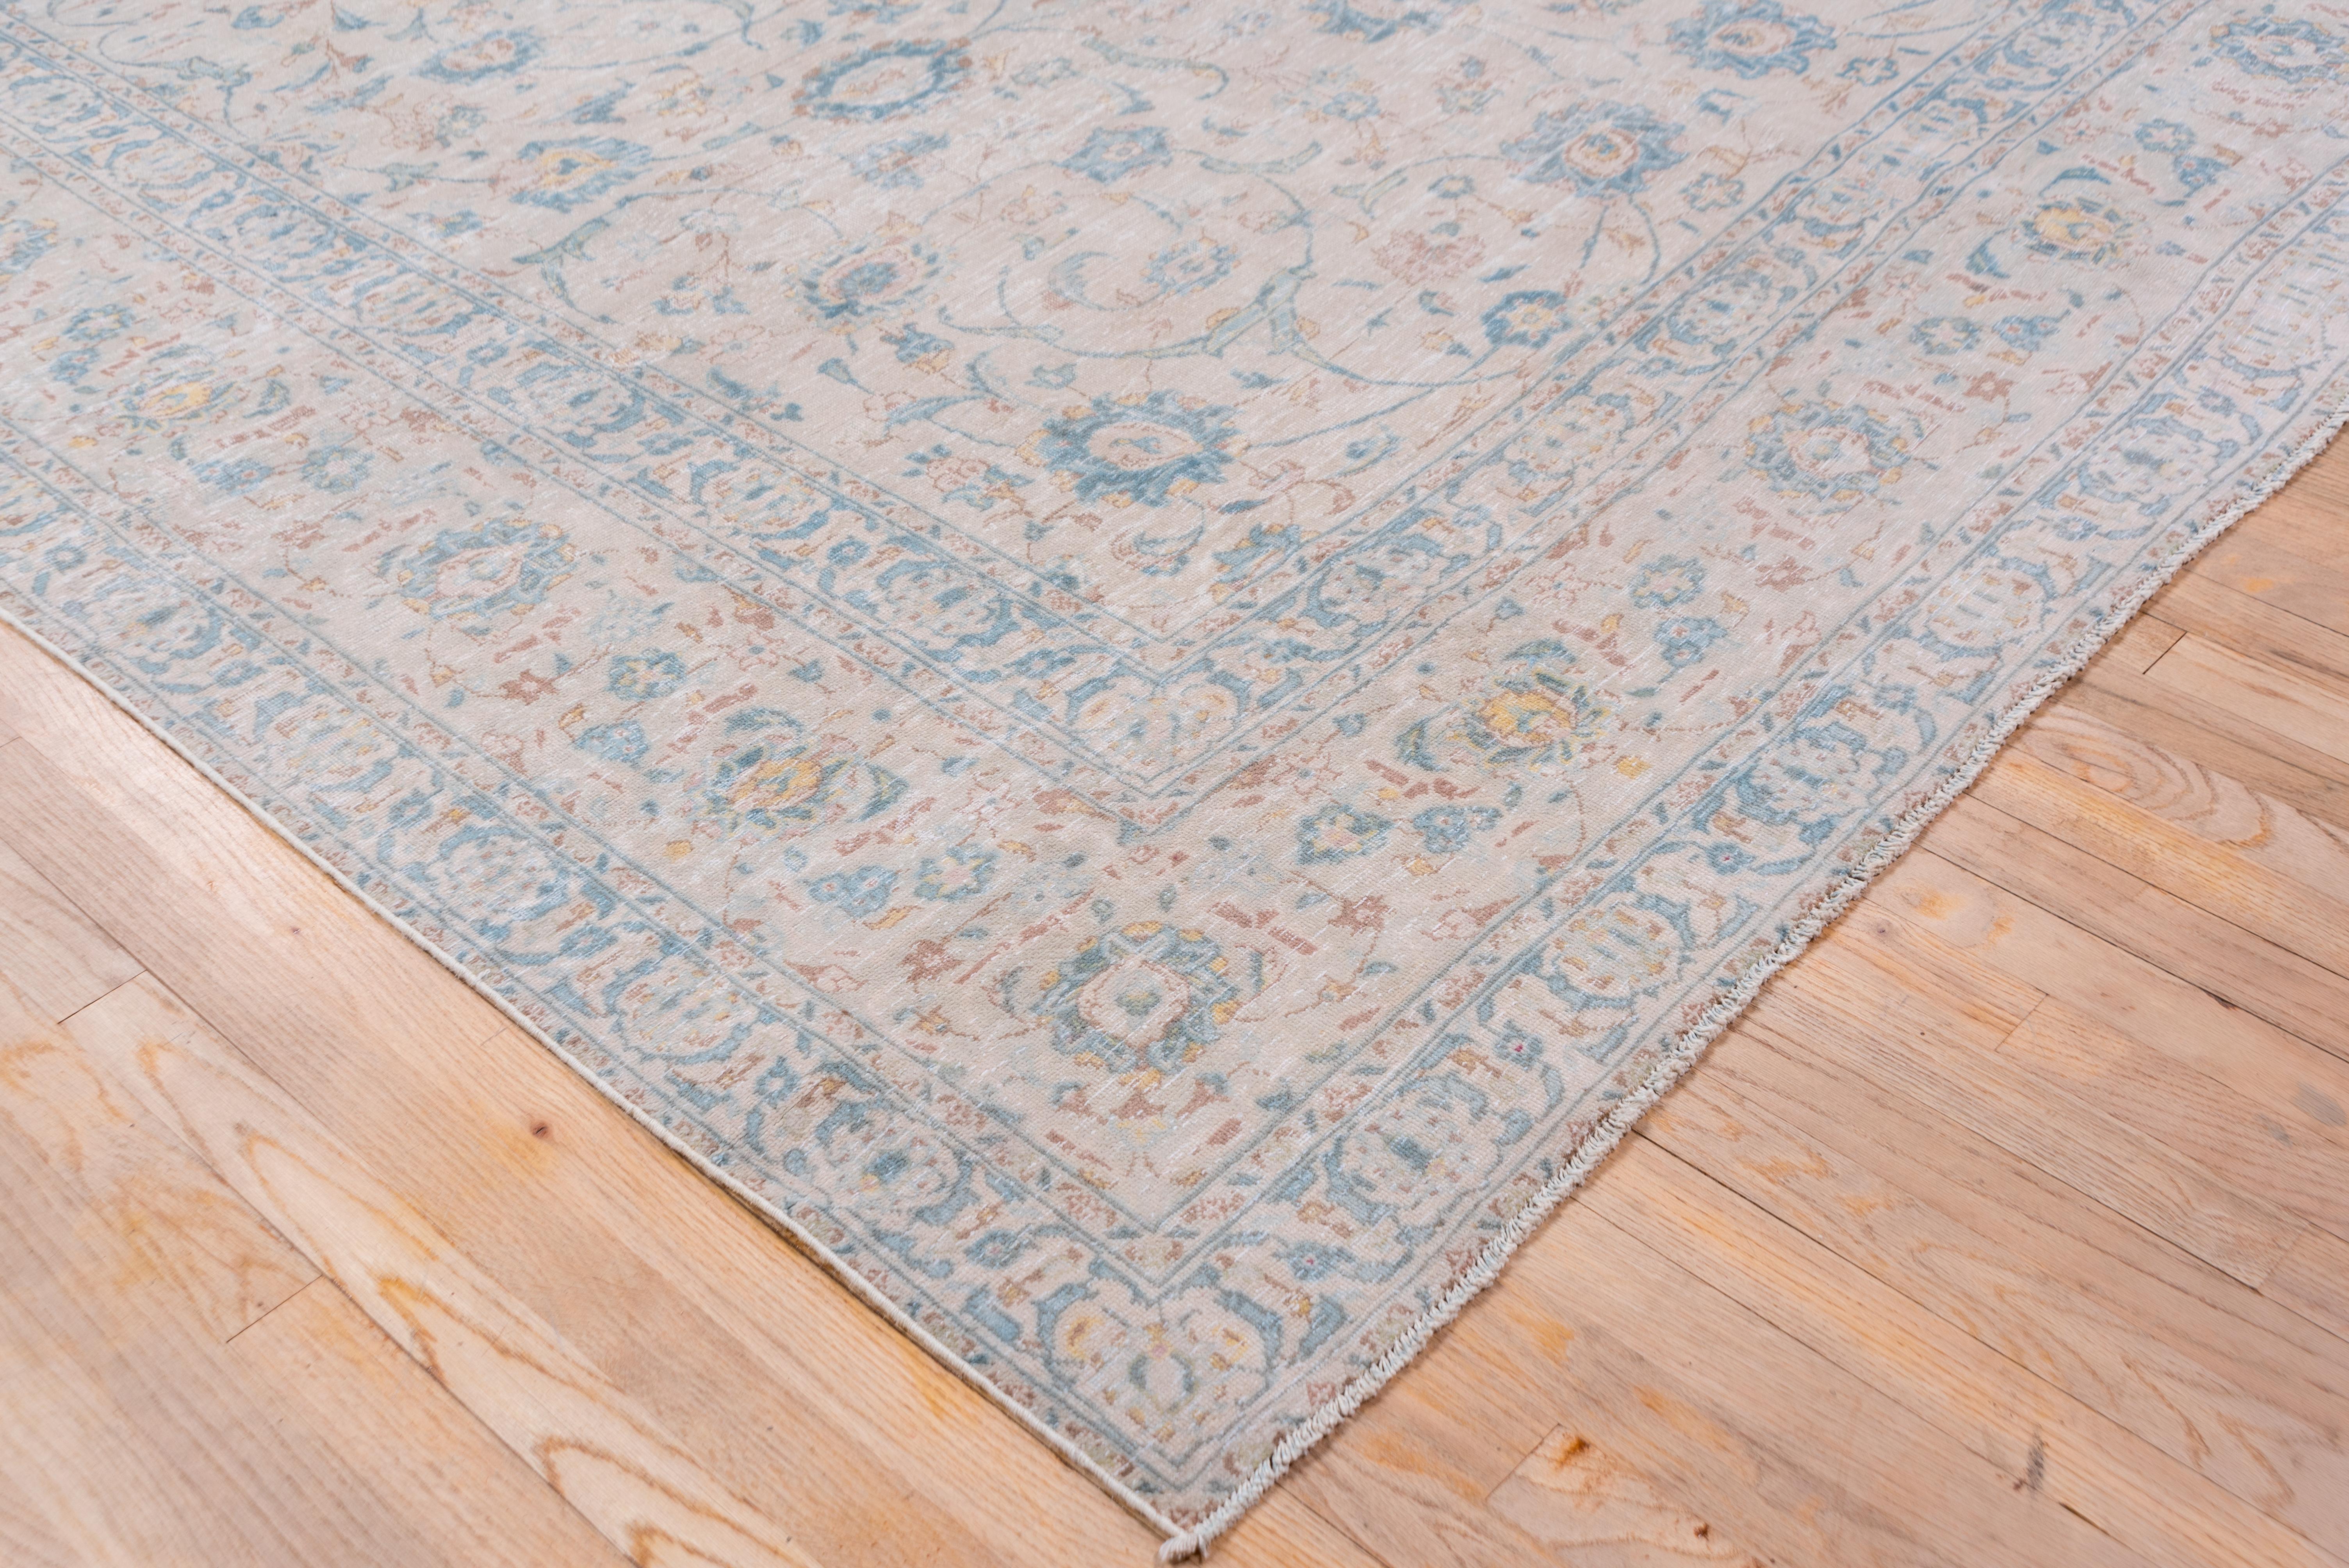 Soft Palette Antique Tabriz Carpet In Good Condition For Sale In New York, NY